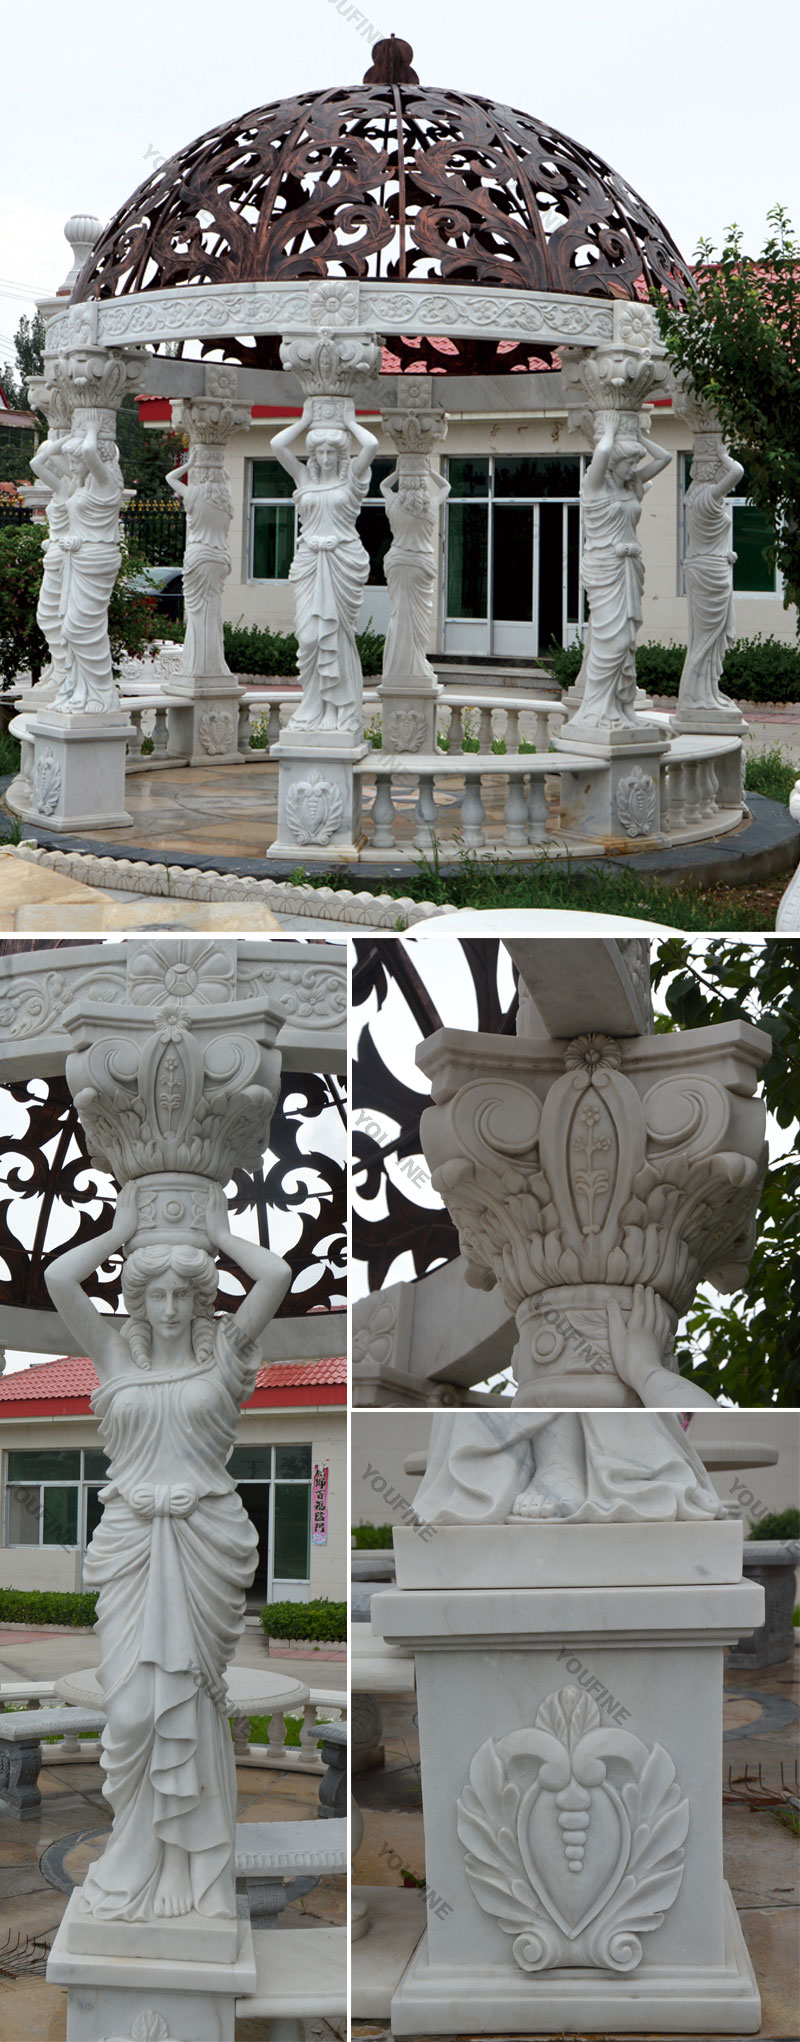 Details of outdoor white marble pergola with woman statues design for castle